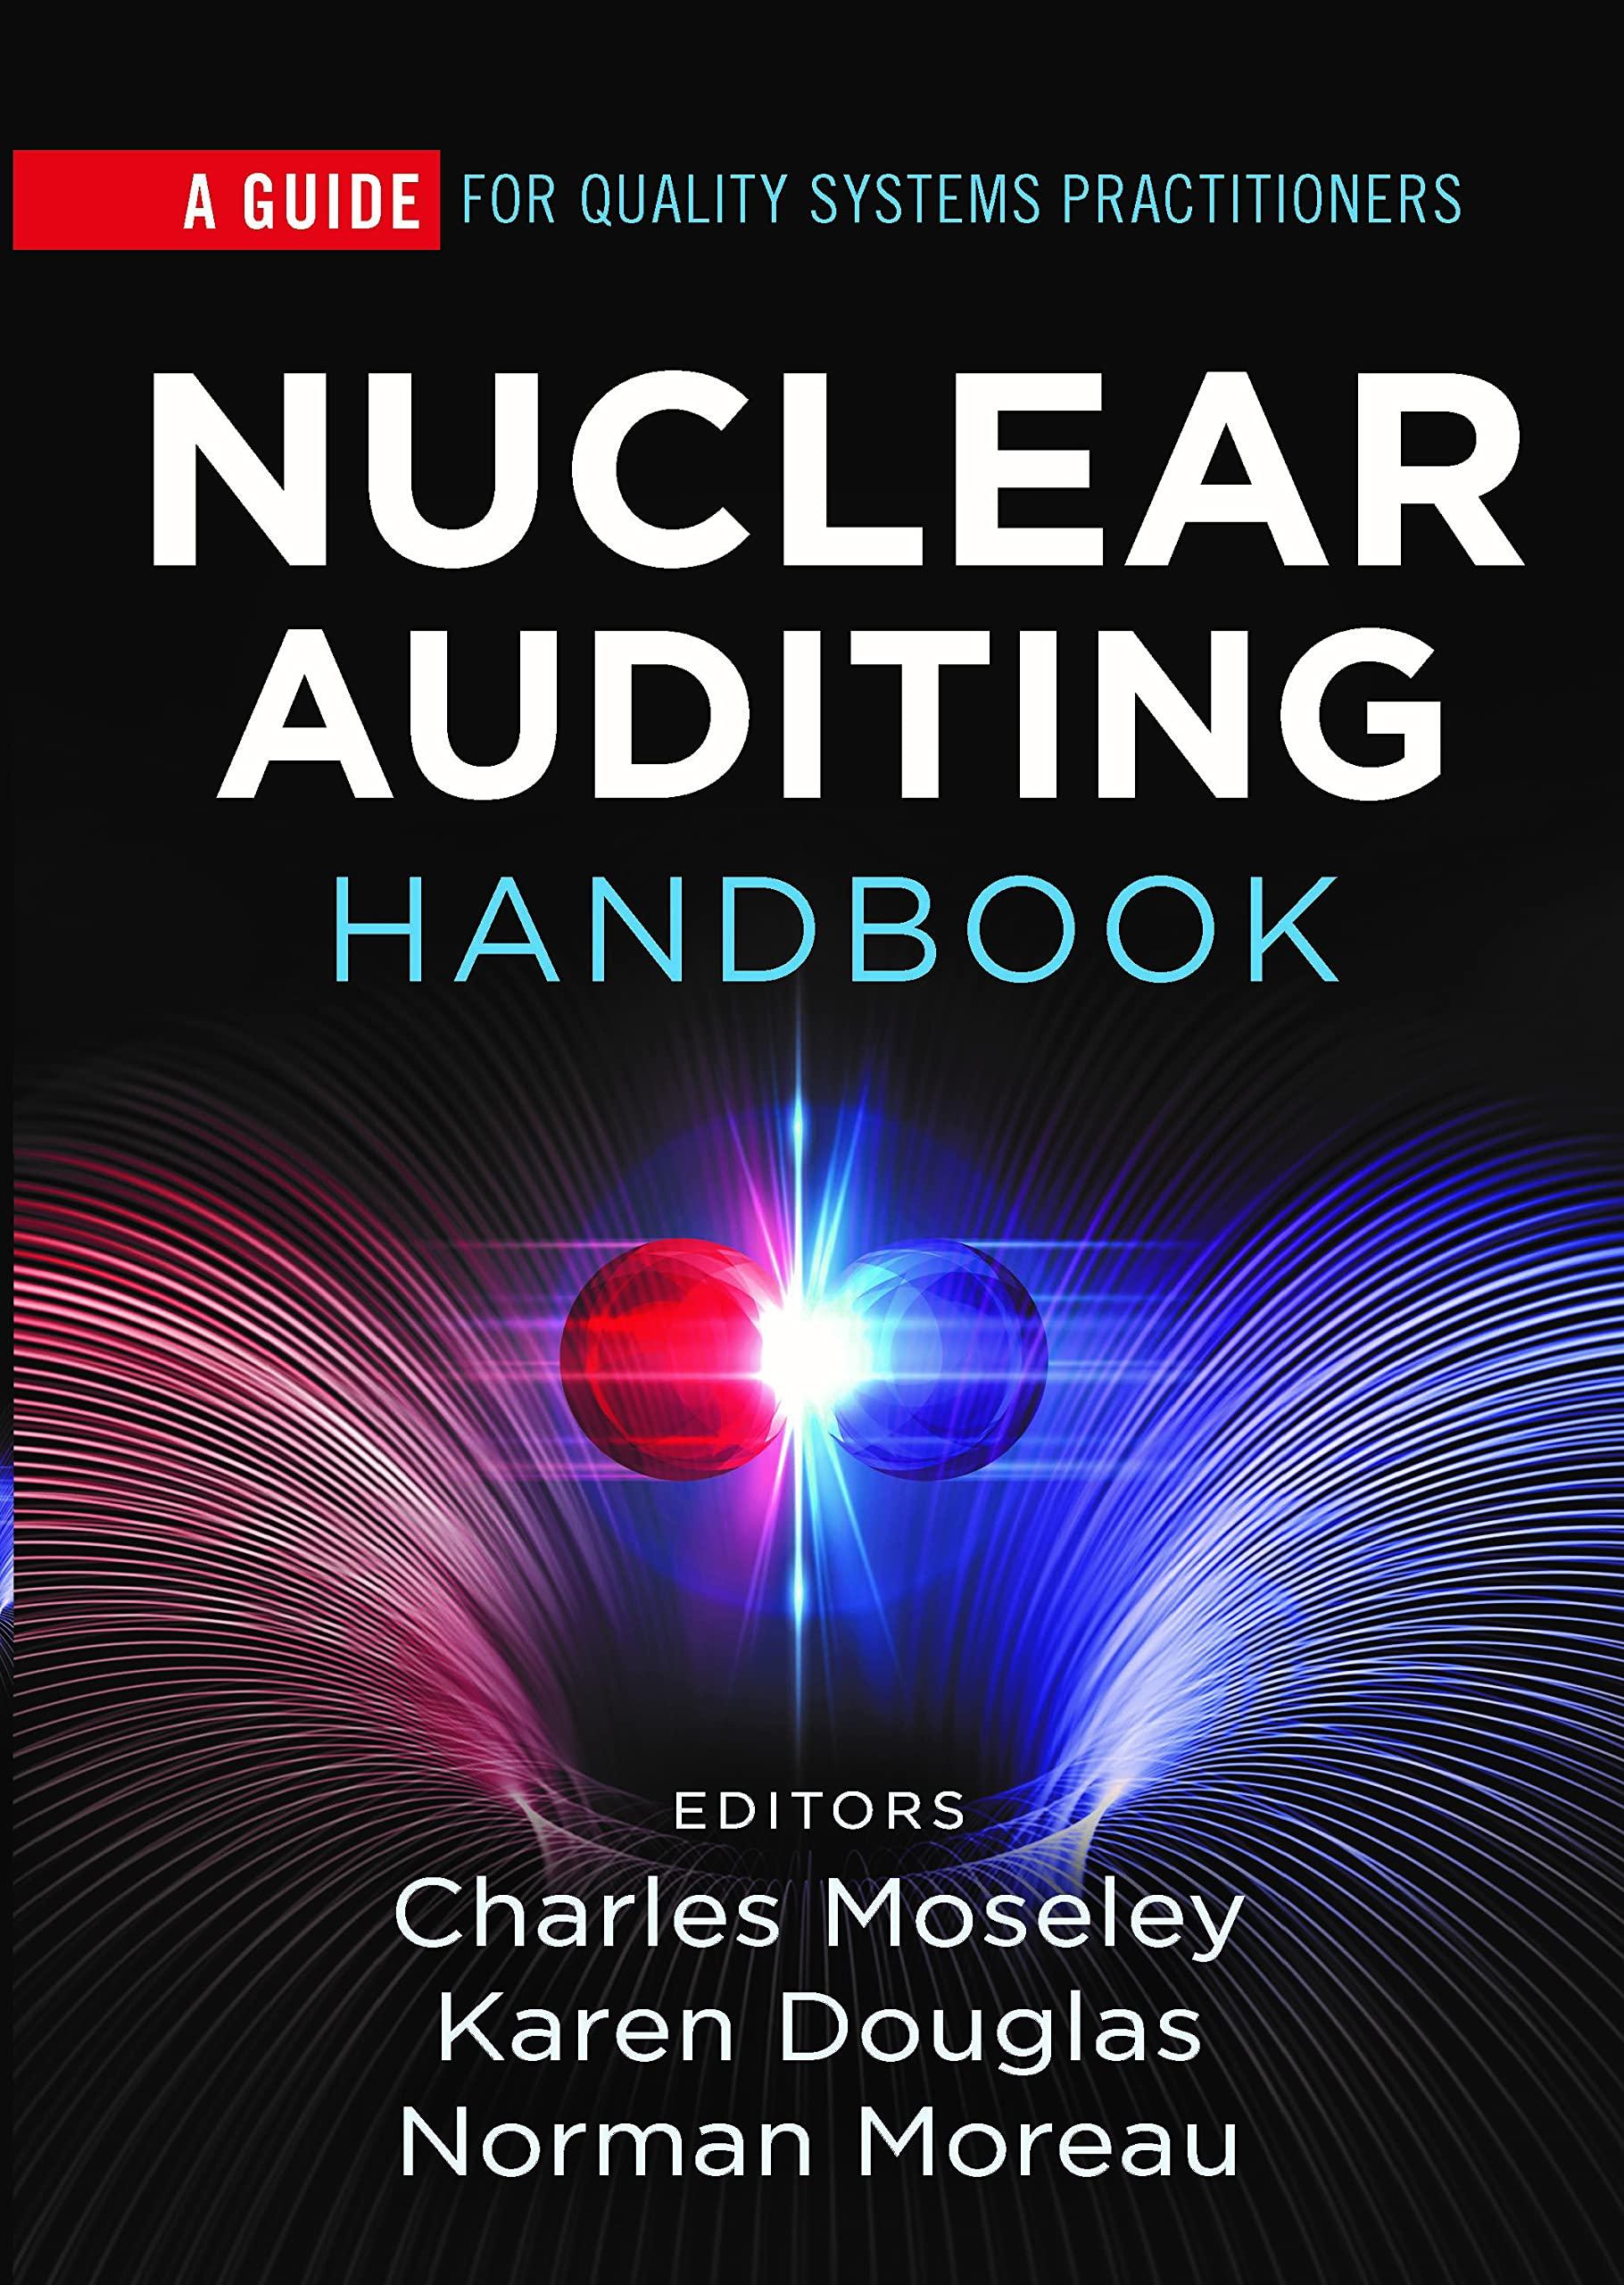 nuclear auditing handbook a guide for quality systems practitioners 1st edition charles moseley, norman